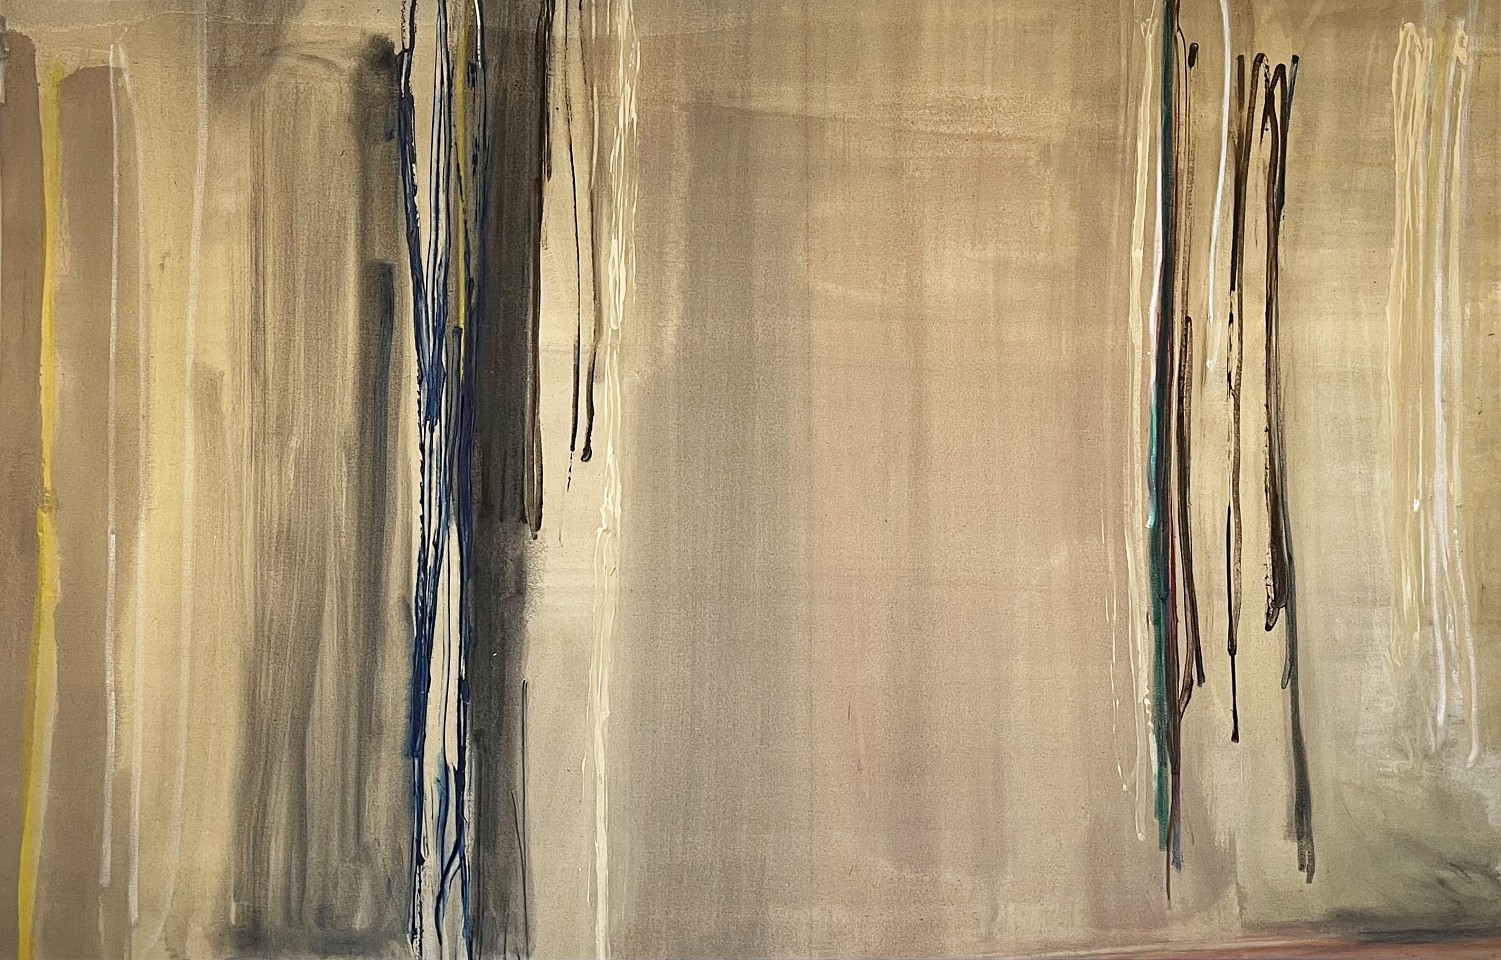 Larry Zox, Moby Grey, 1981
Acrylic on canvas, 56 x 88 in. (142.2 x 223.5 cm)
ZOX00005